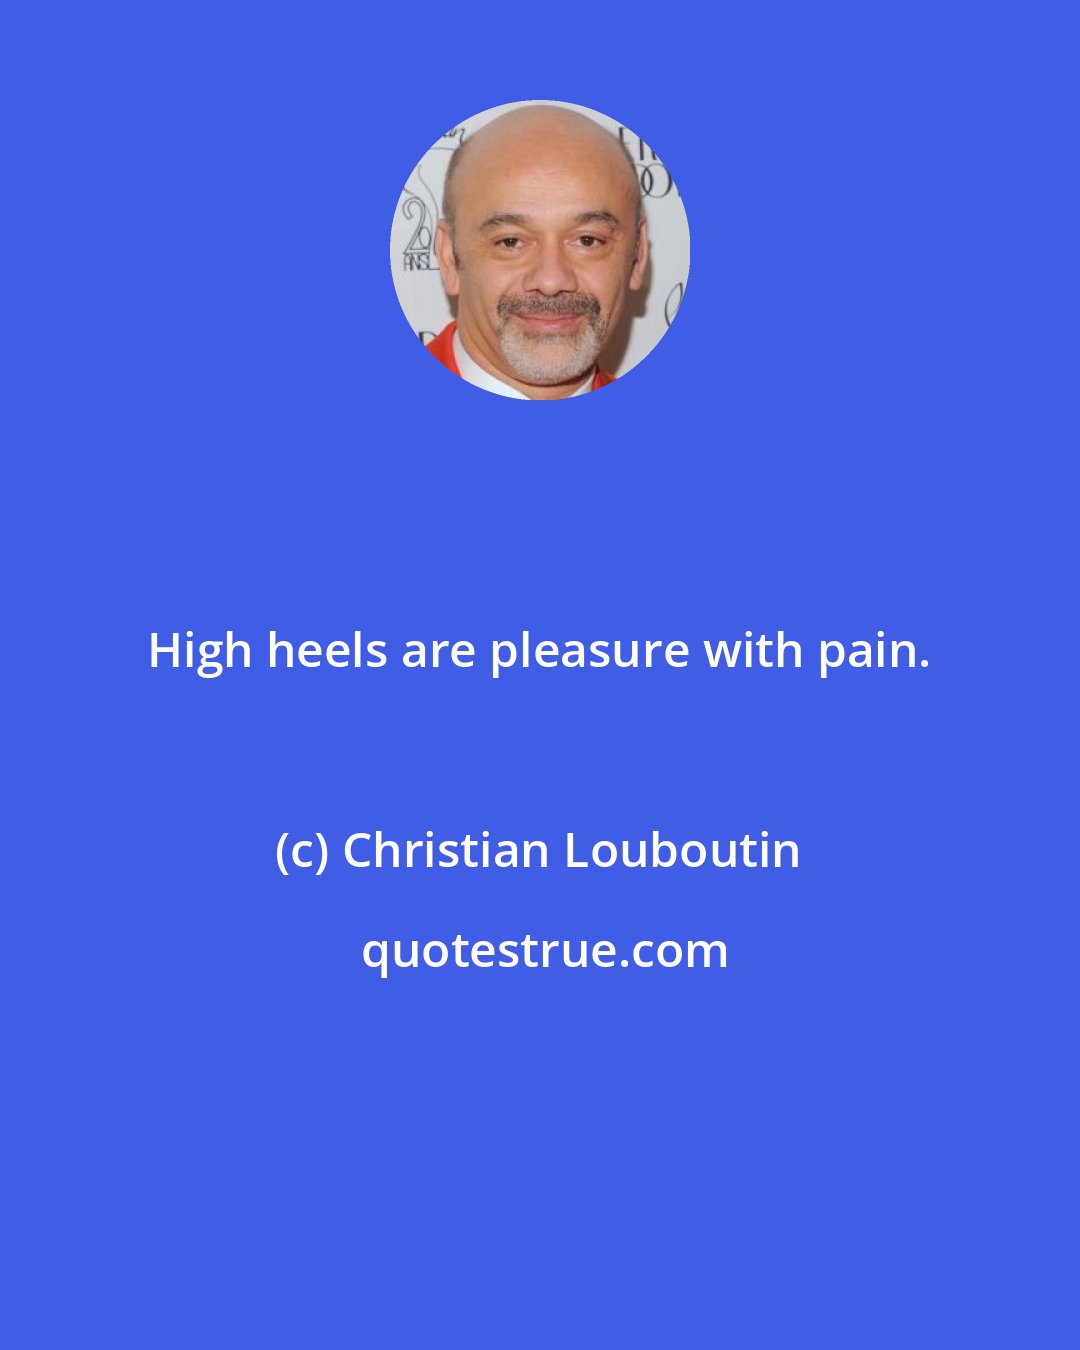 Christian Louboutin: High heels are pleasure with pain.